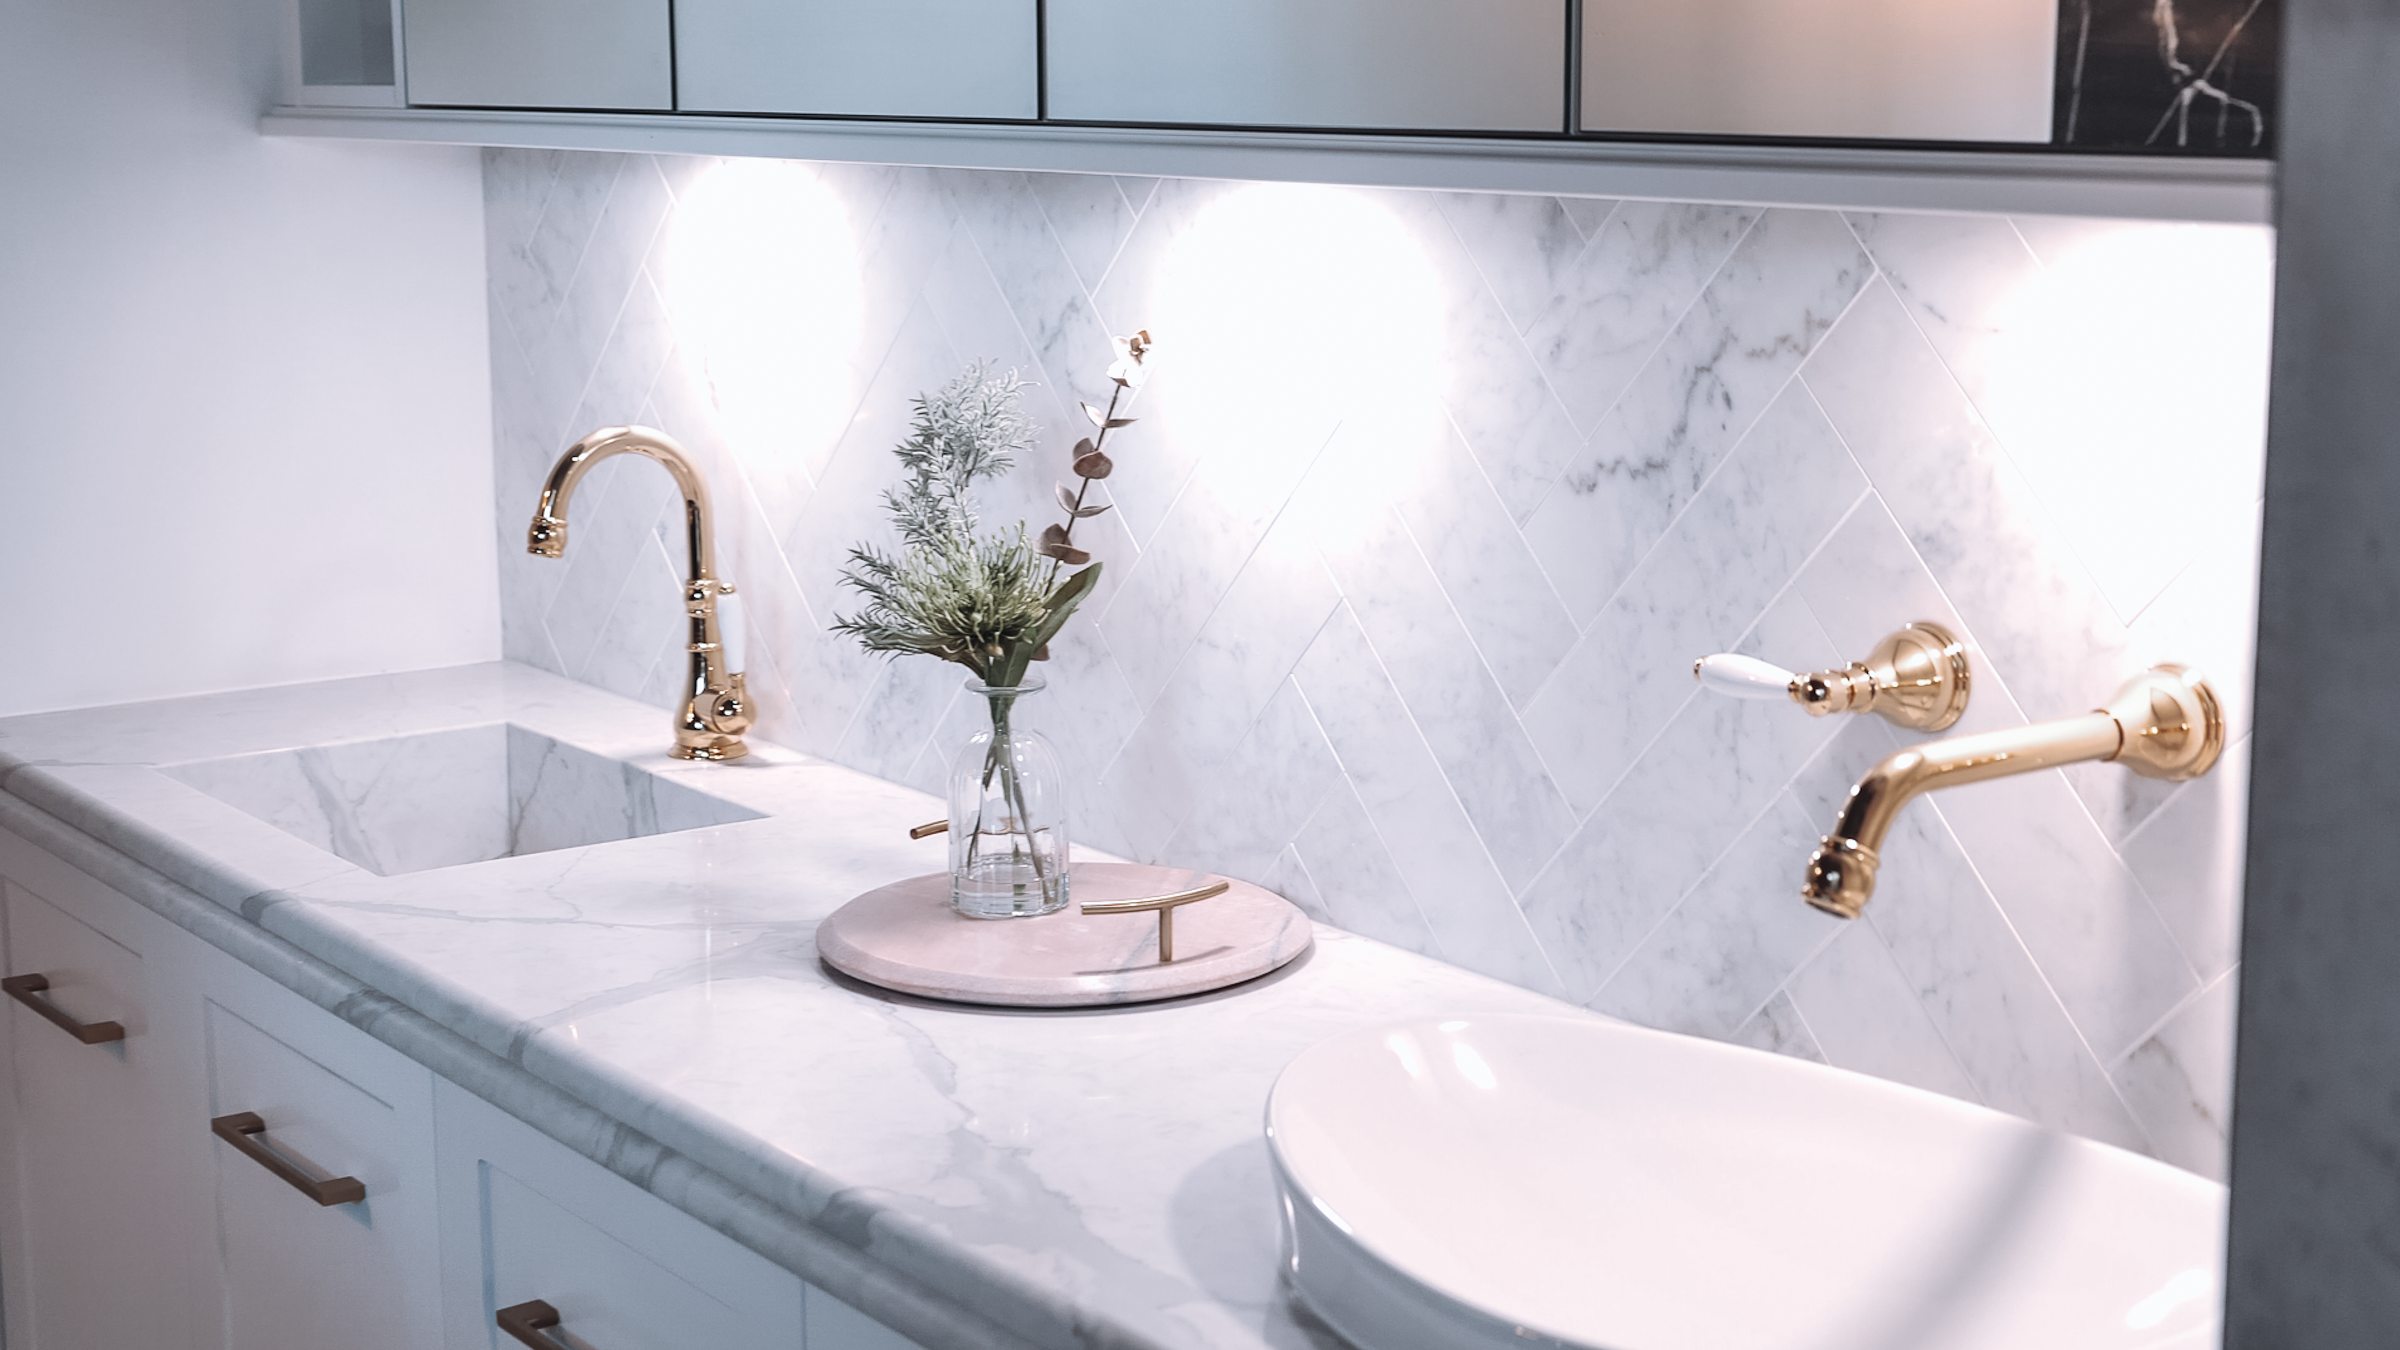 WIN a HUGE $5000 premium tiling package thanks to Vogue Tiling!